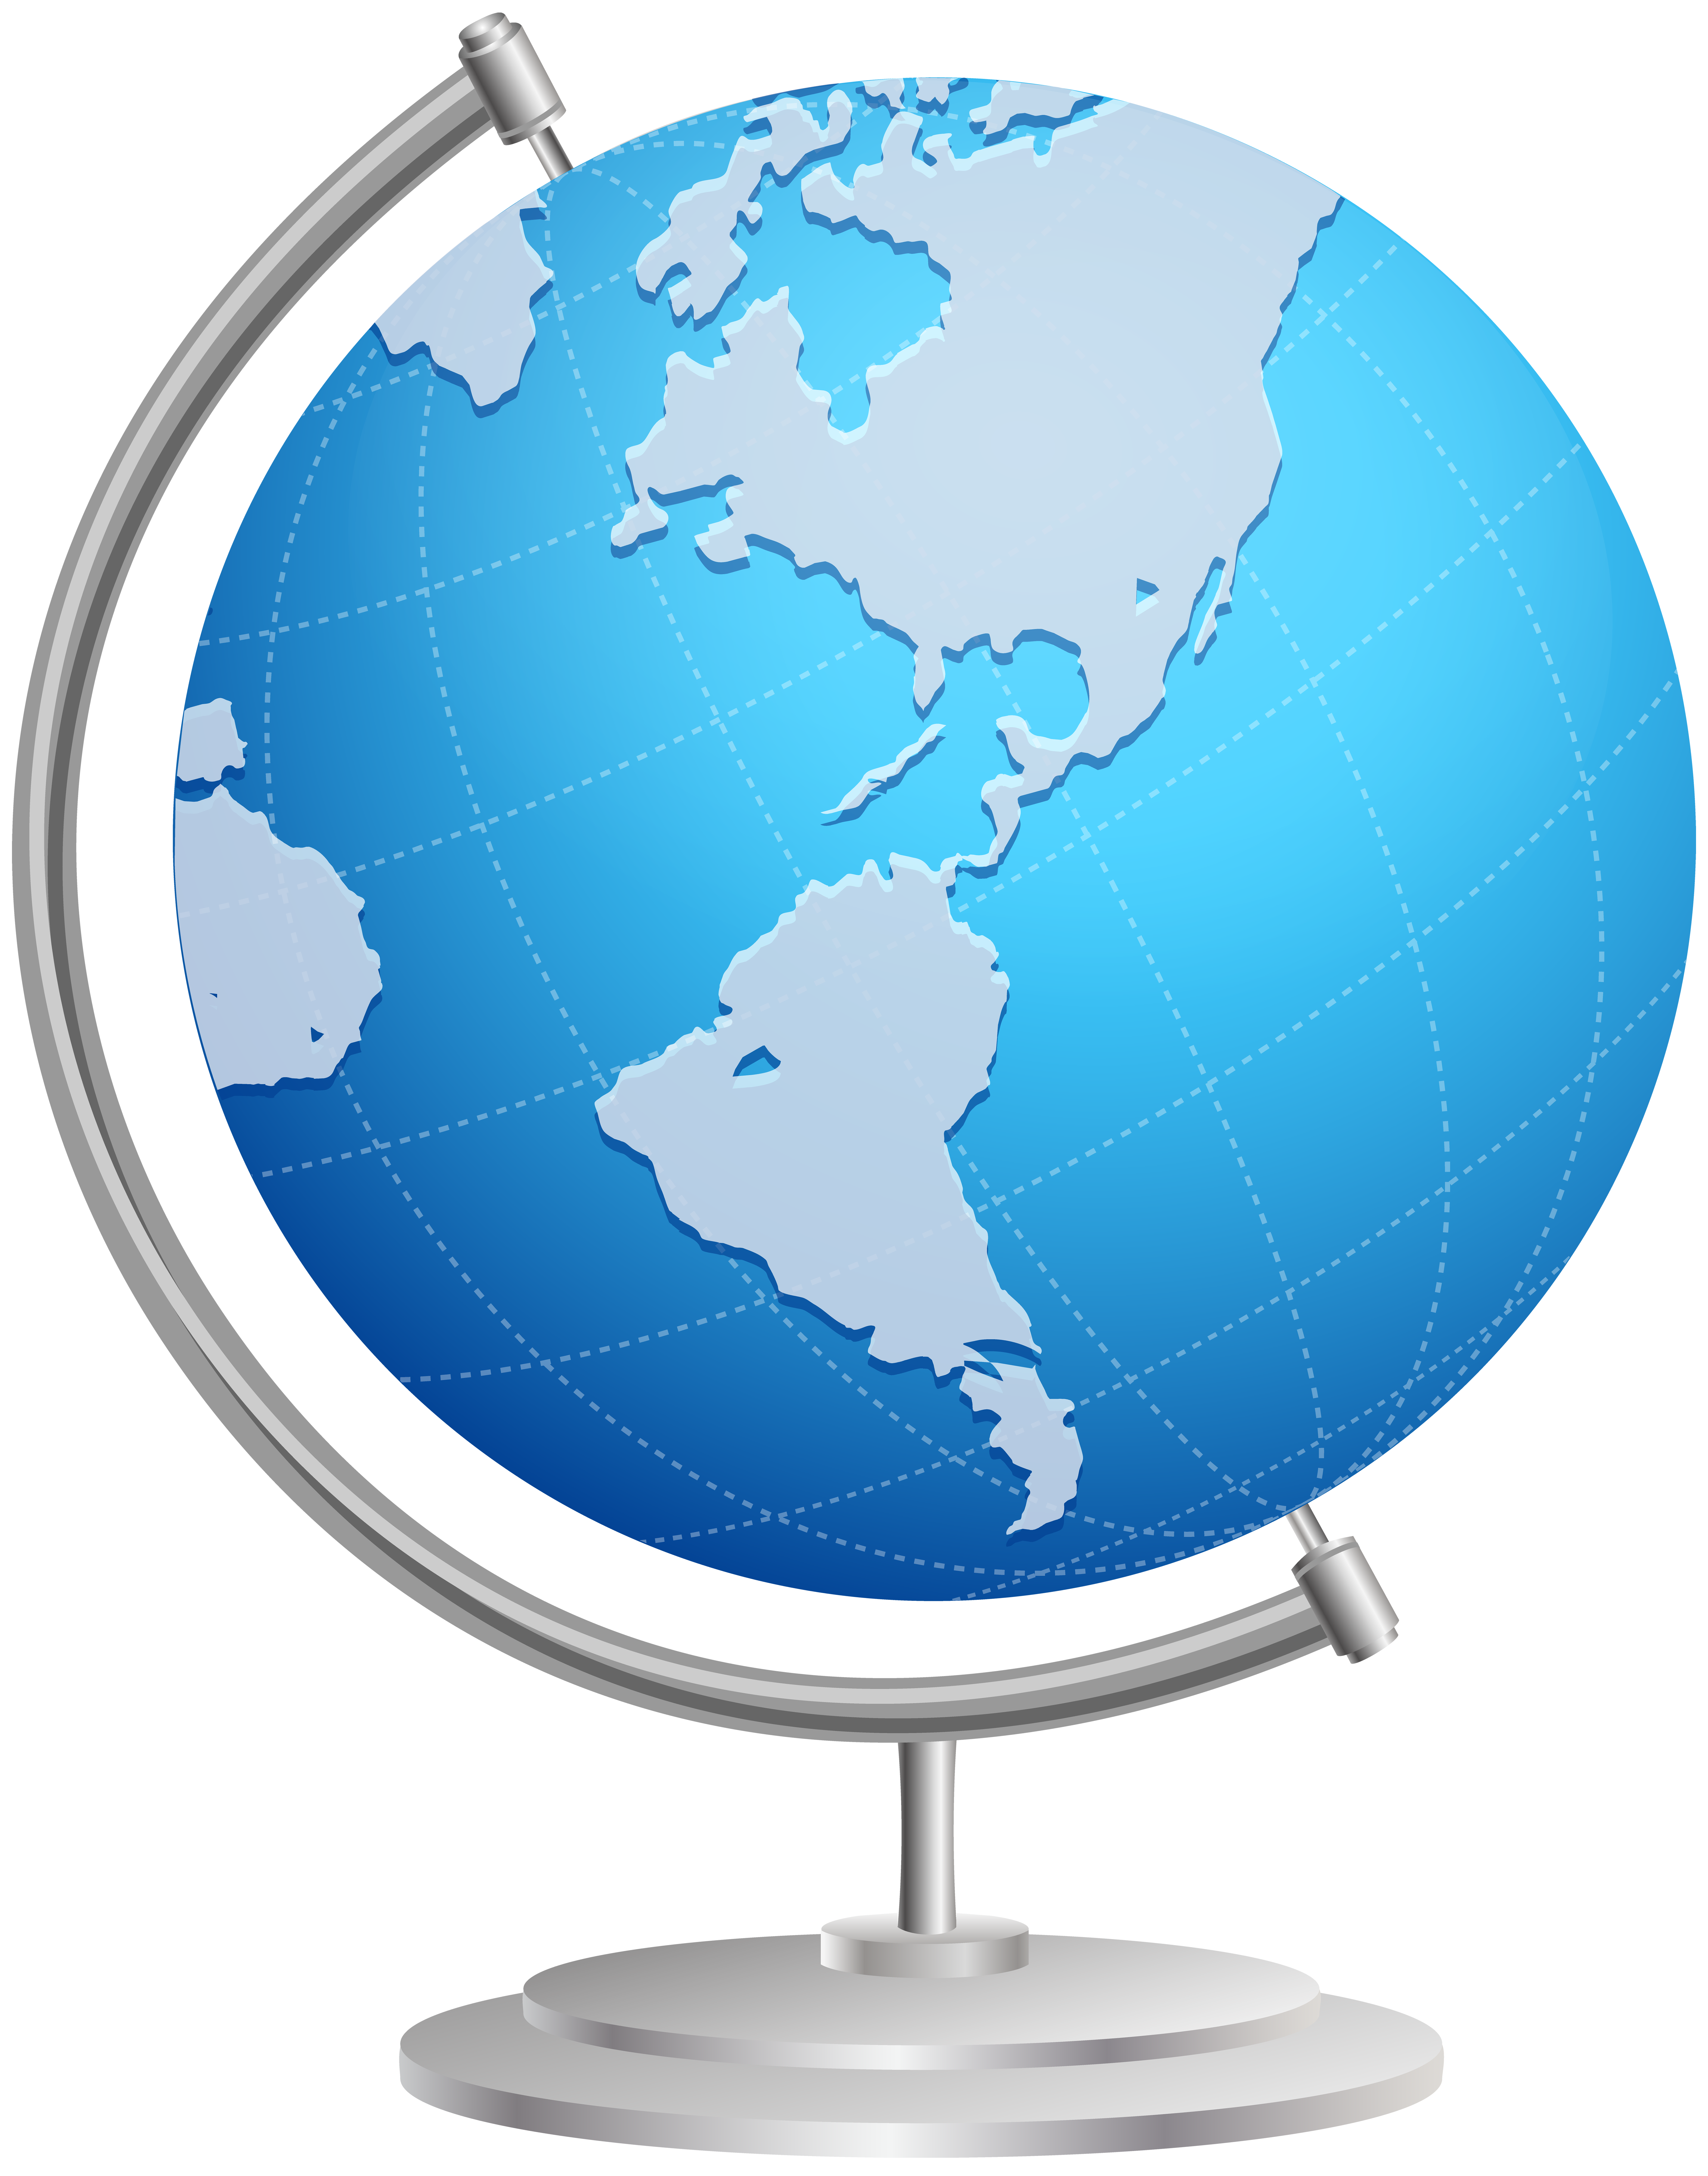 World Globe Transparent Png Image Gallery Yopriceville High Quality Images And Transparent Png Free Clipart